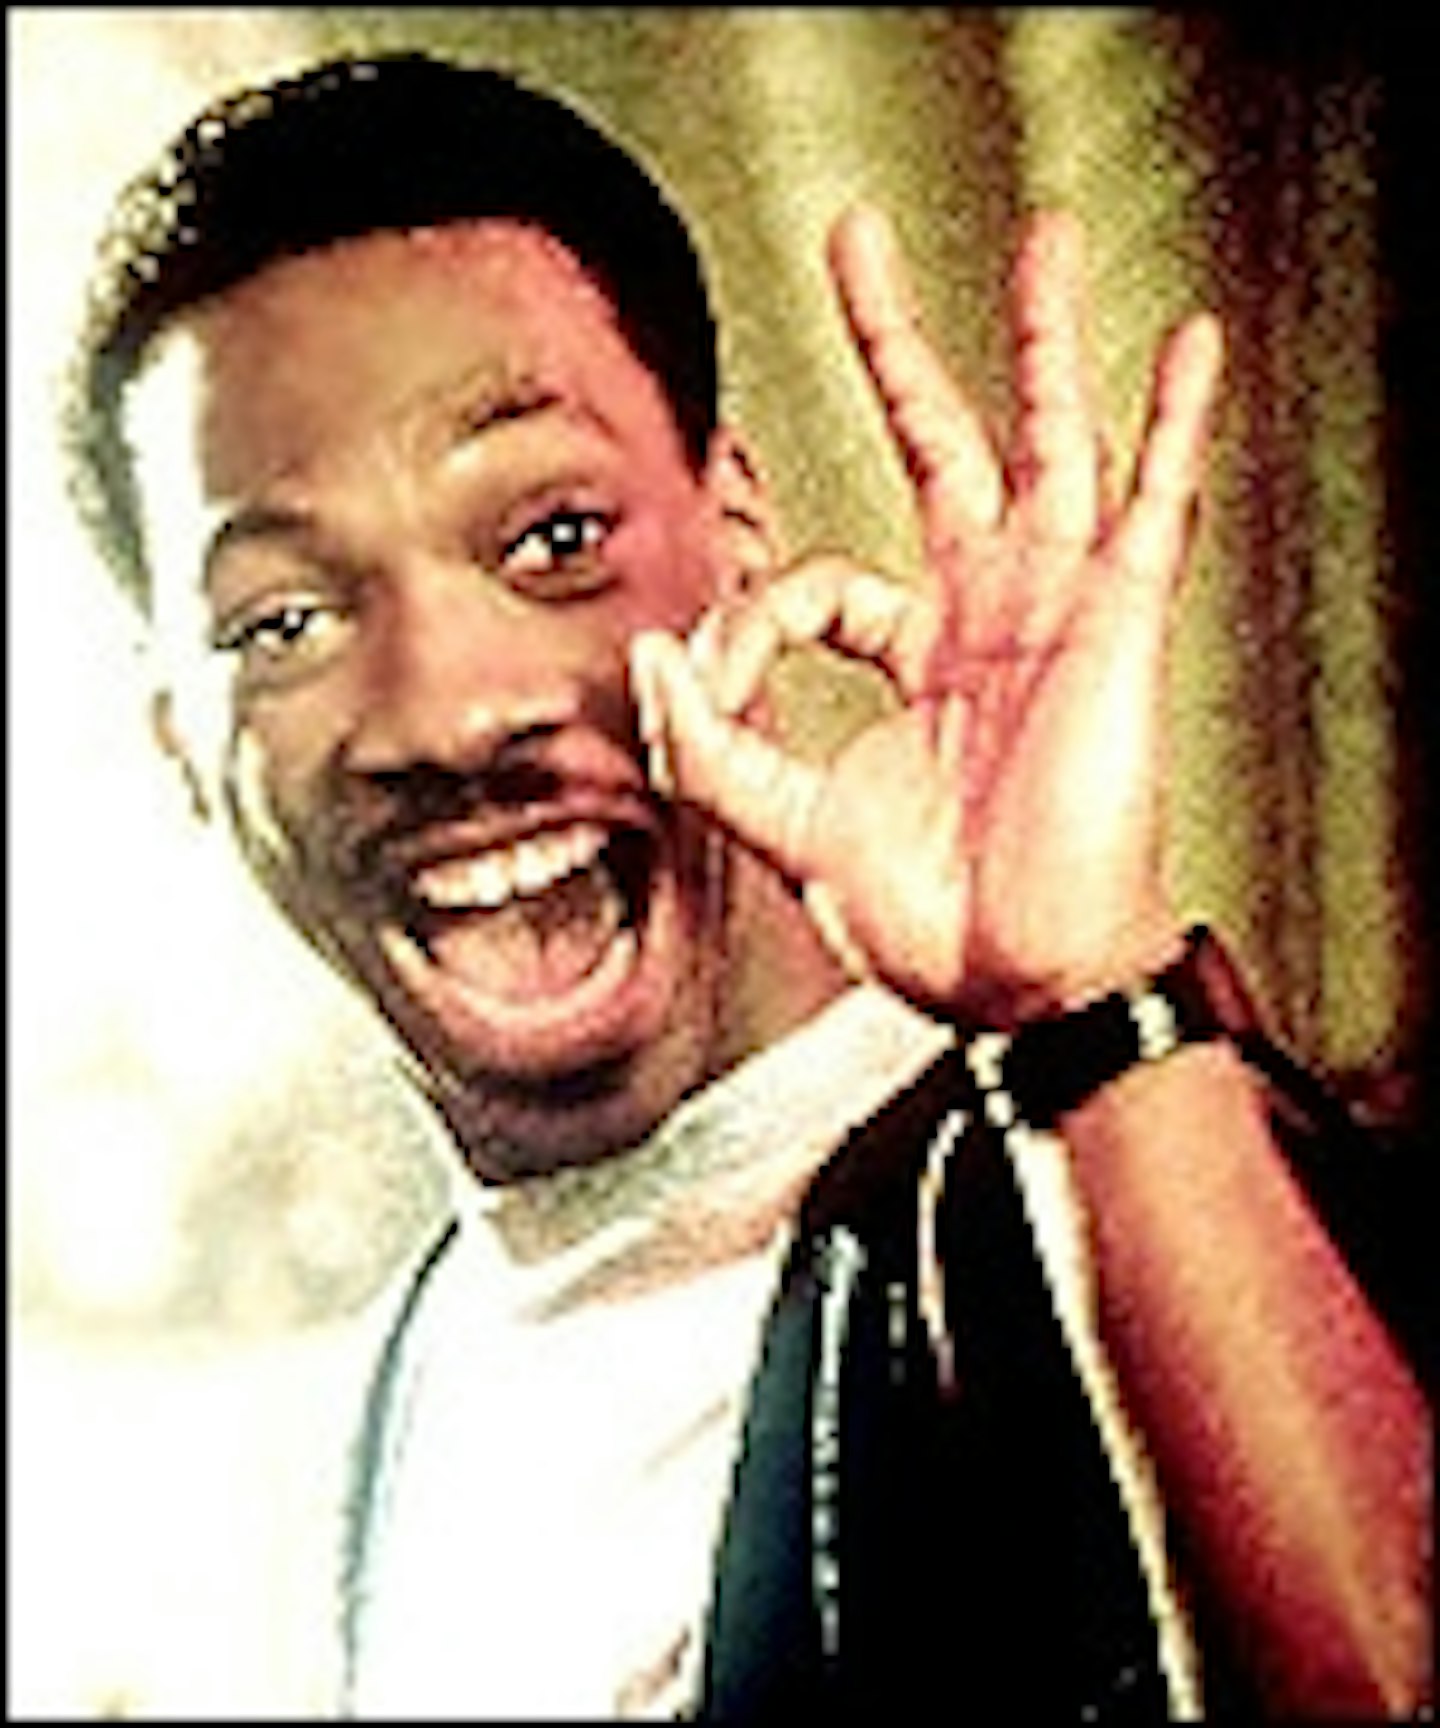 Beverly Hills Cop: The TV Series?